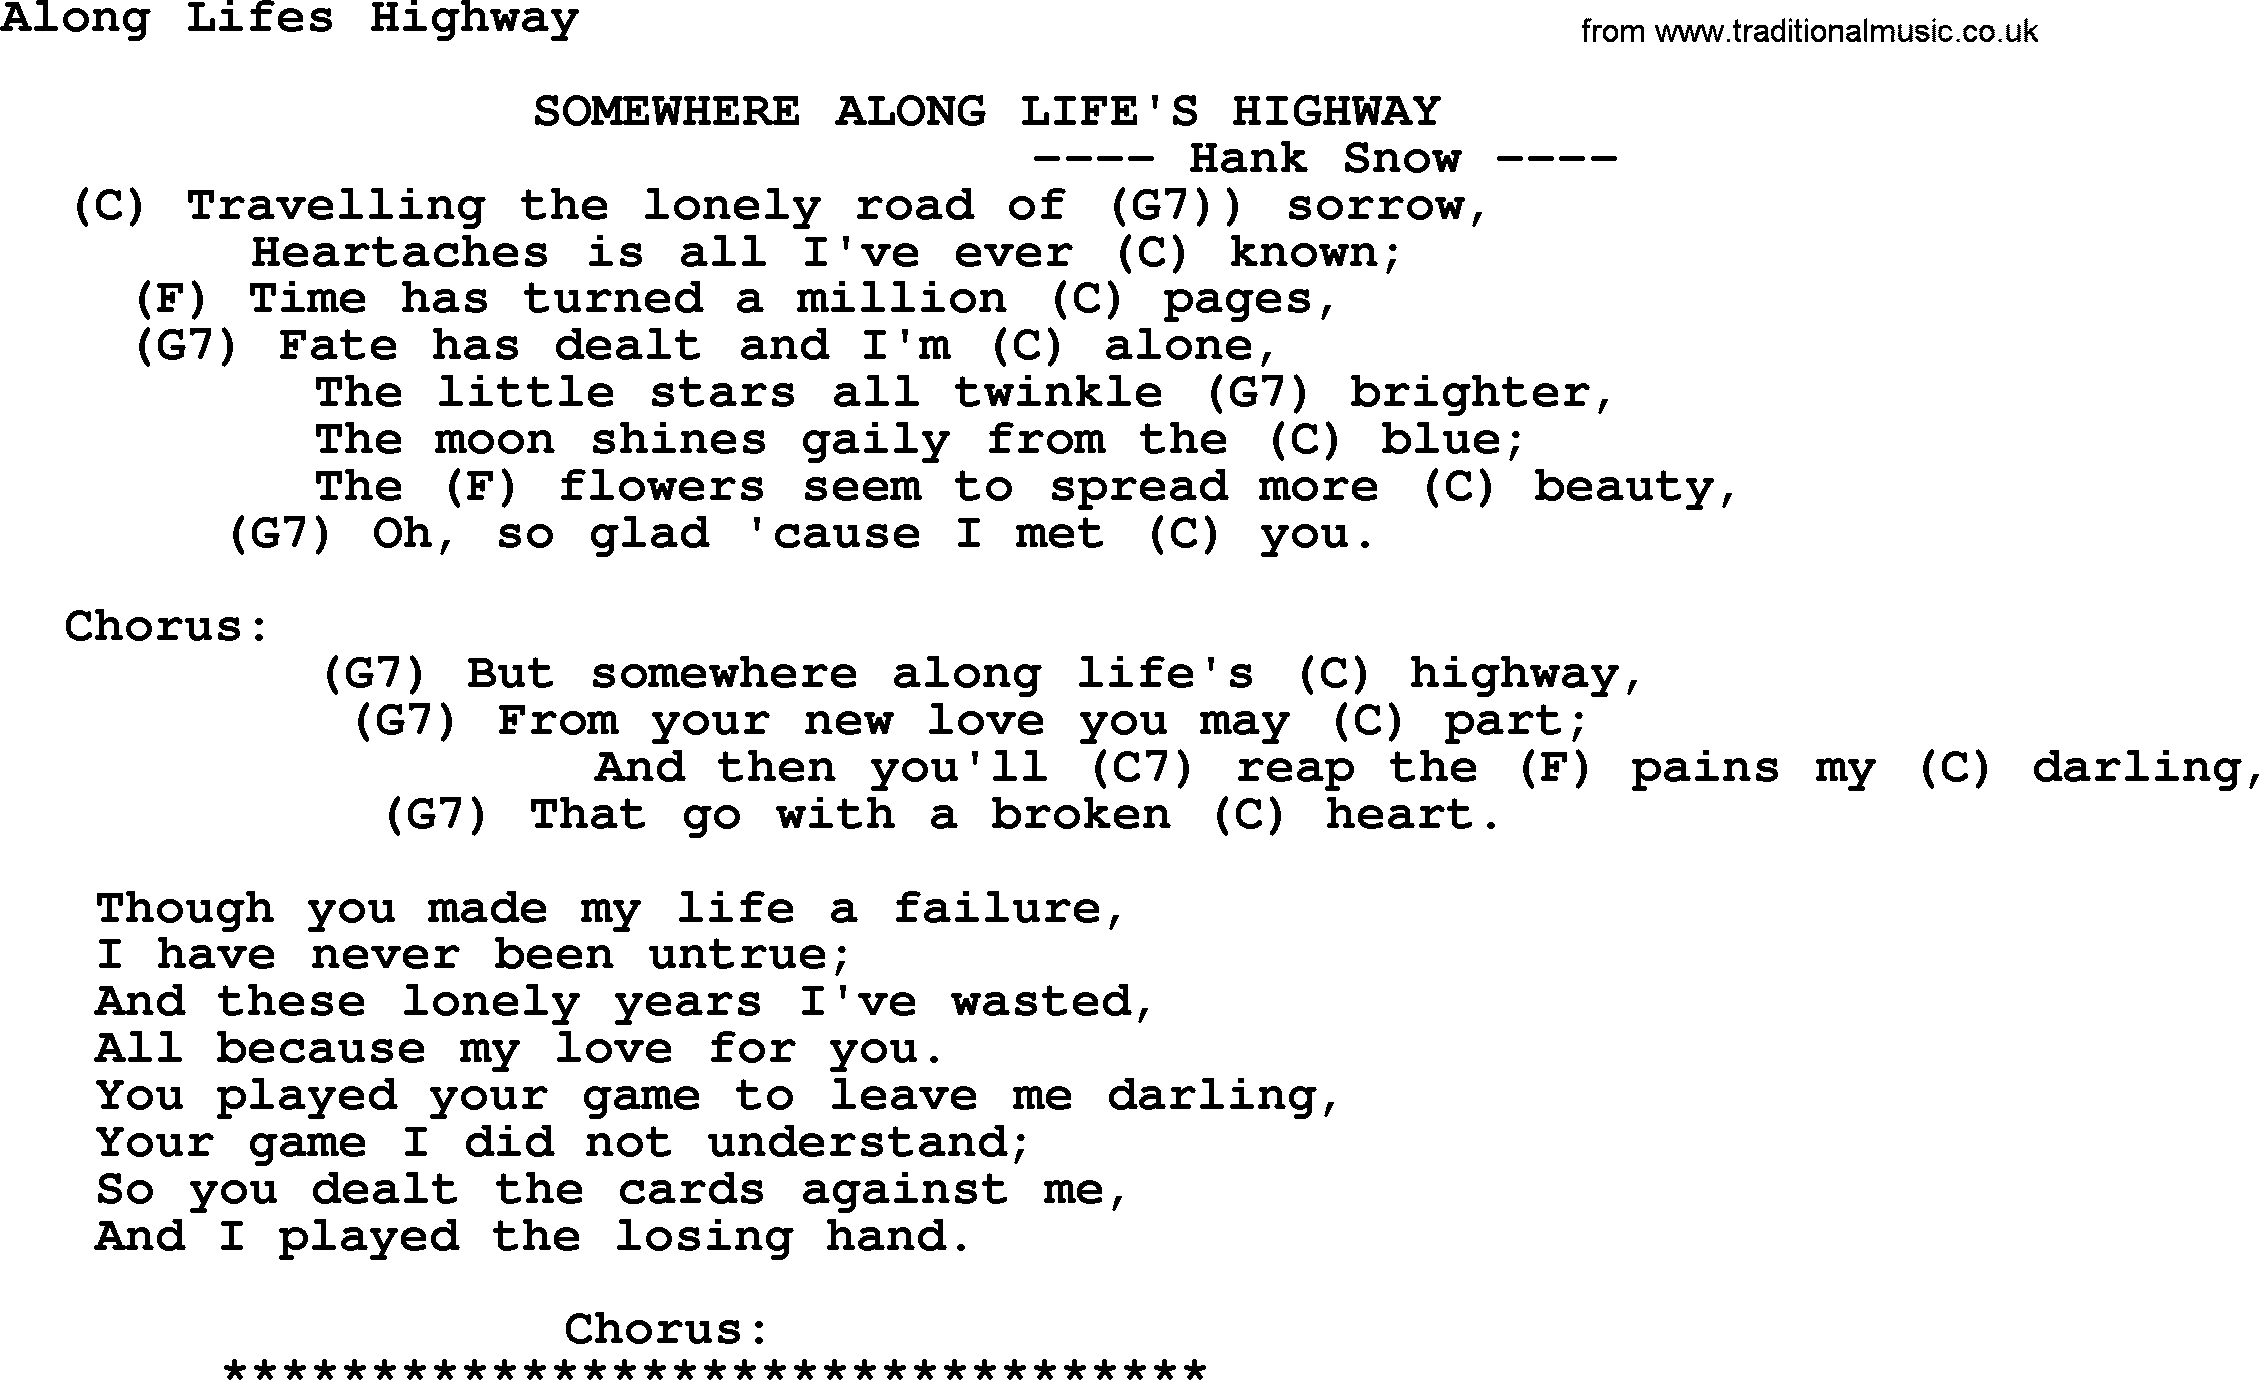 Bluegrass song: Along Lifes Highway, lyrics and chords